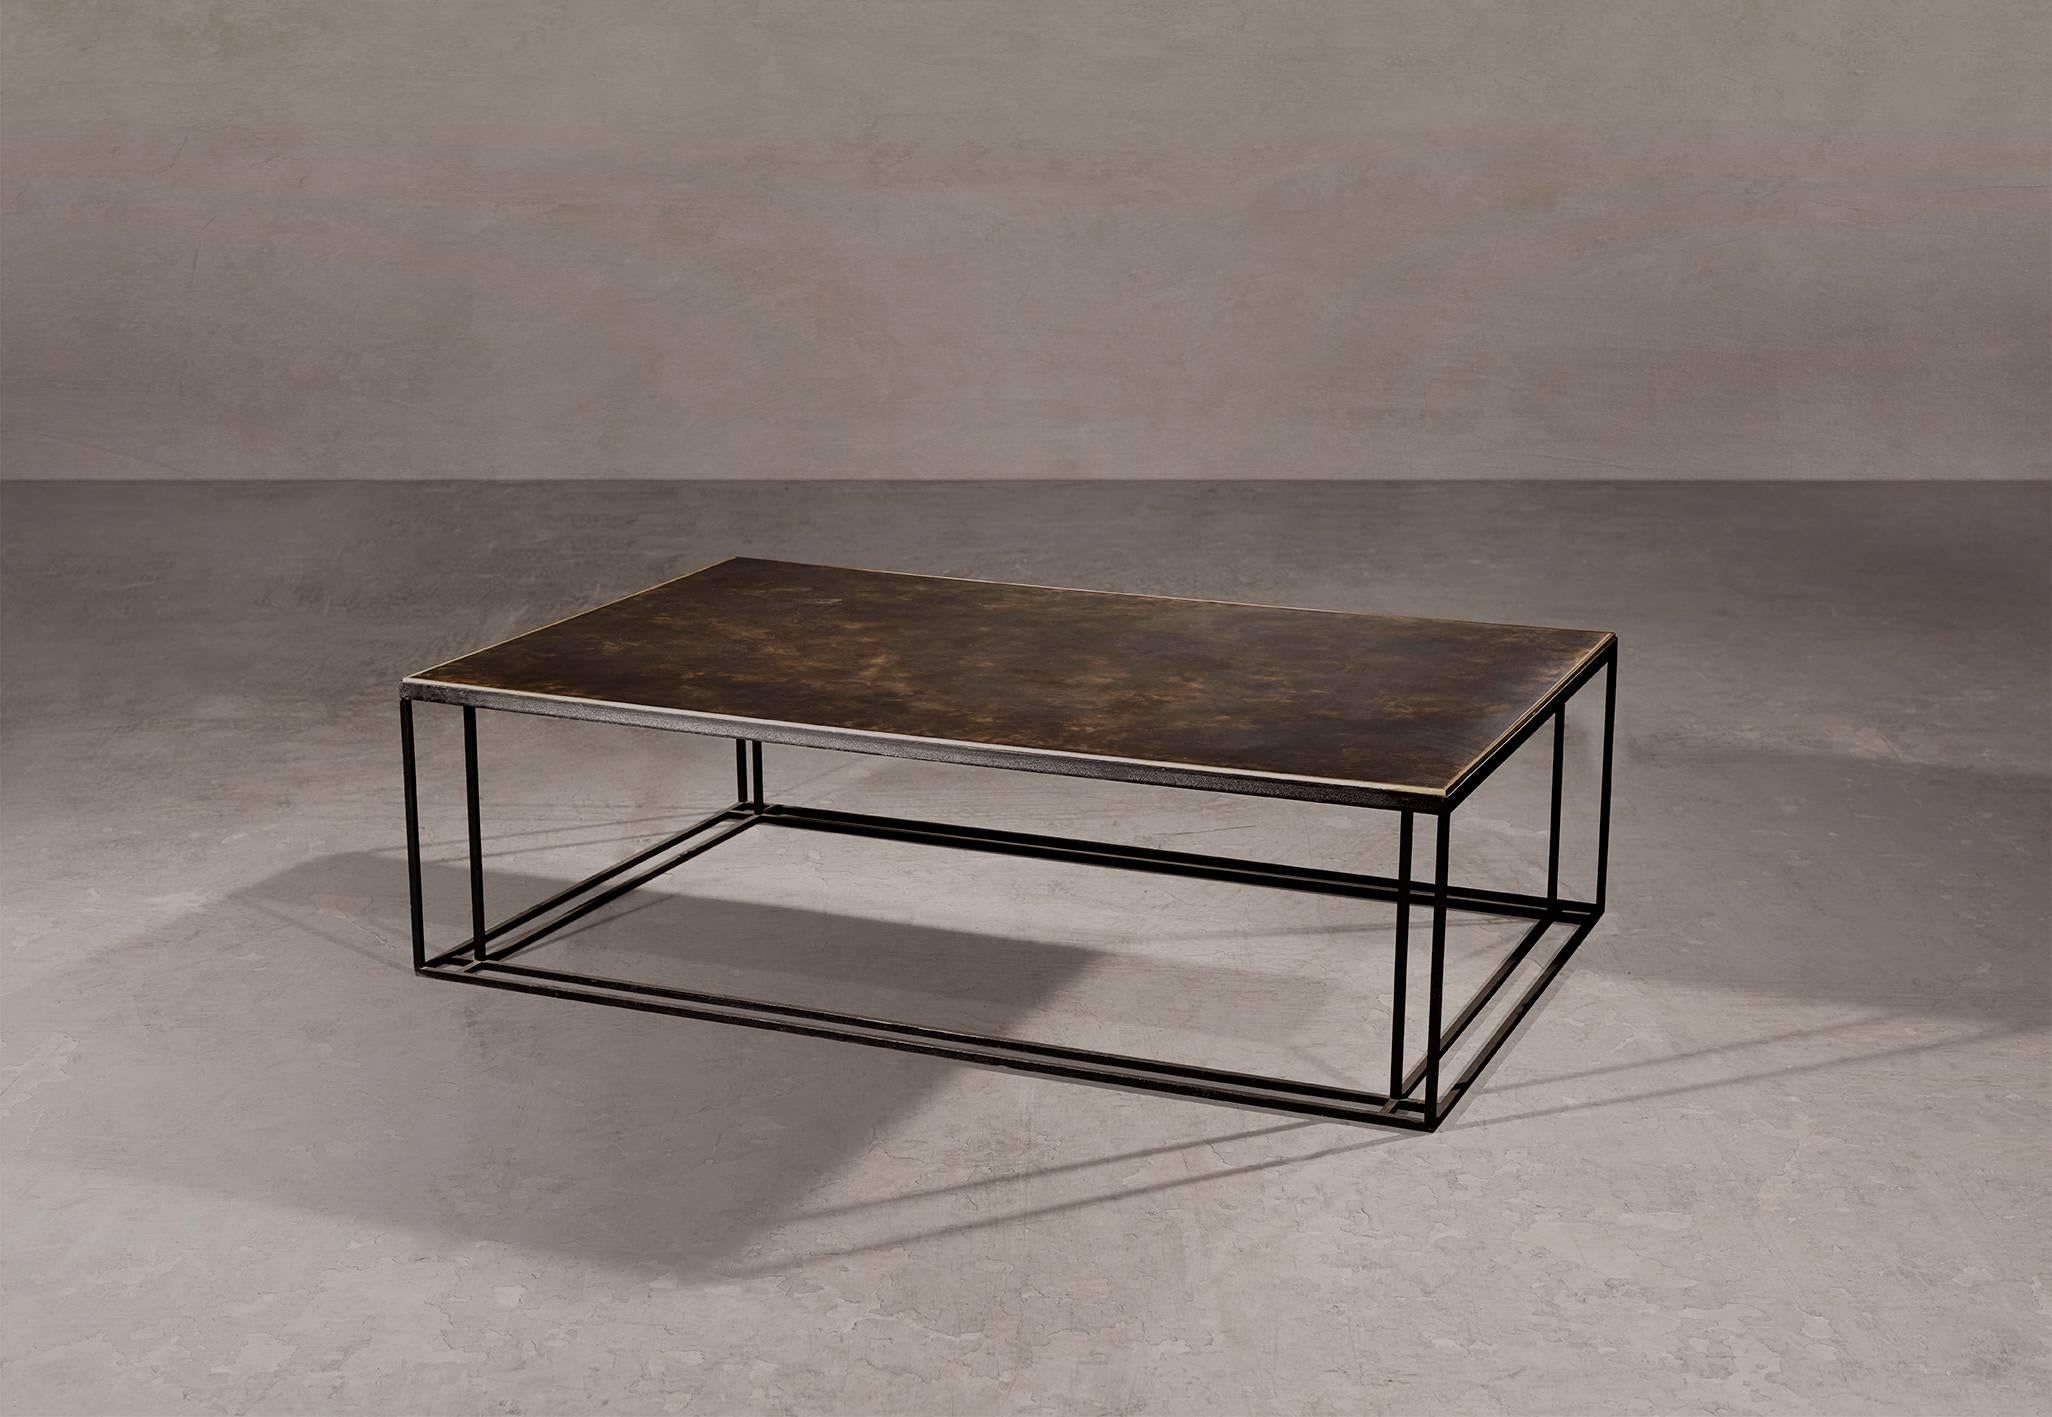 A coffee table in blackened steel and patinated brass, with a polished brass trim. Hand crafted to order in the North. Bespoke finishes and sizes are available.

Measures: 90cm width x 60cm depth x 35cm height.
Custom finishes and sizes available